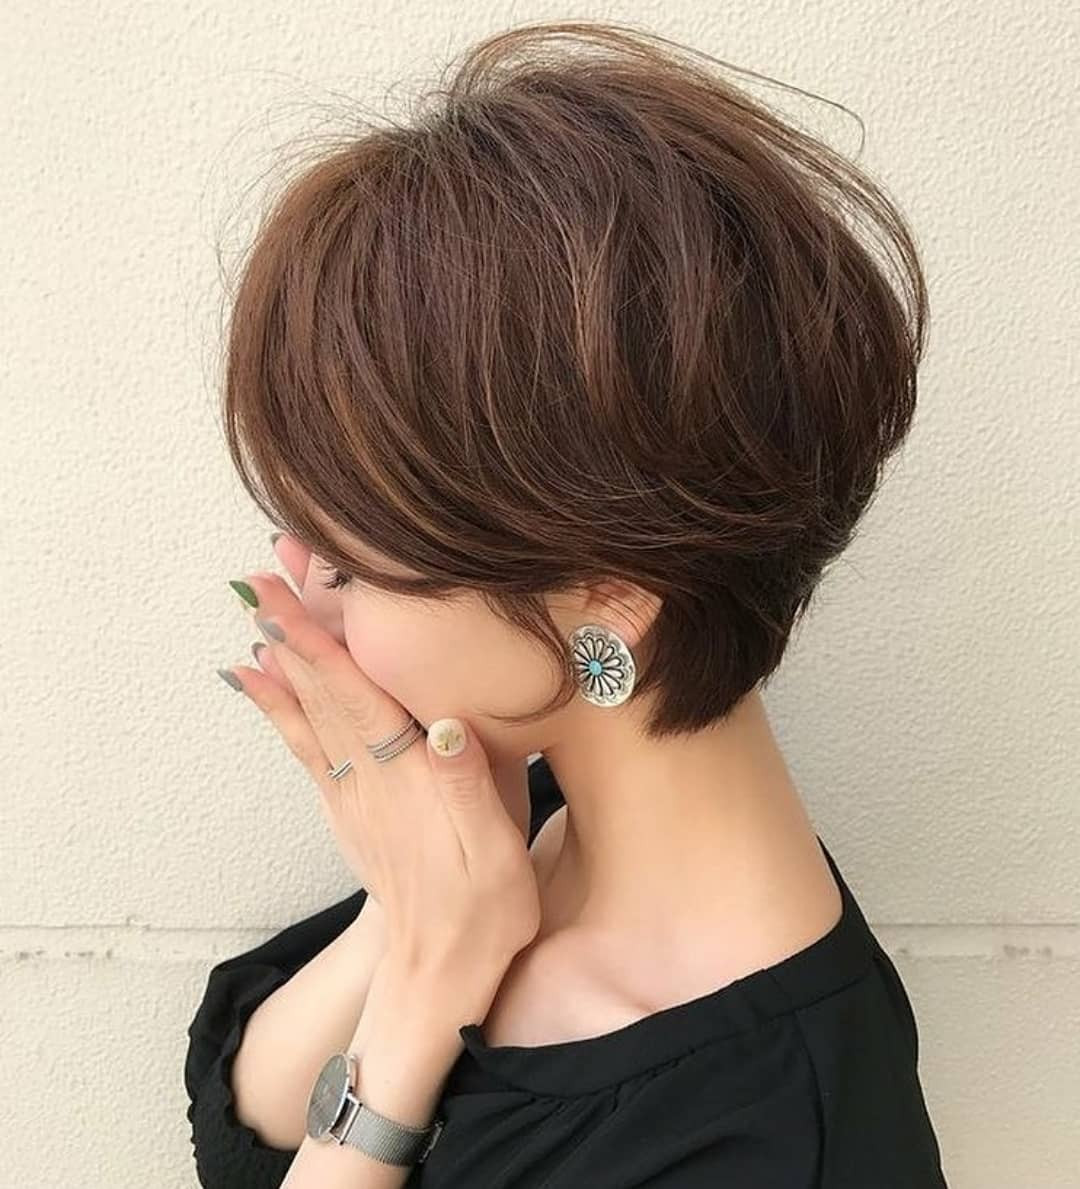 Short Hairstyles For Young Women
 10 Cute Short Hairstyles and Haircuts for Young Girls